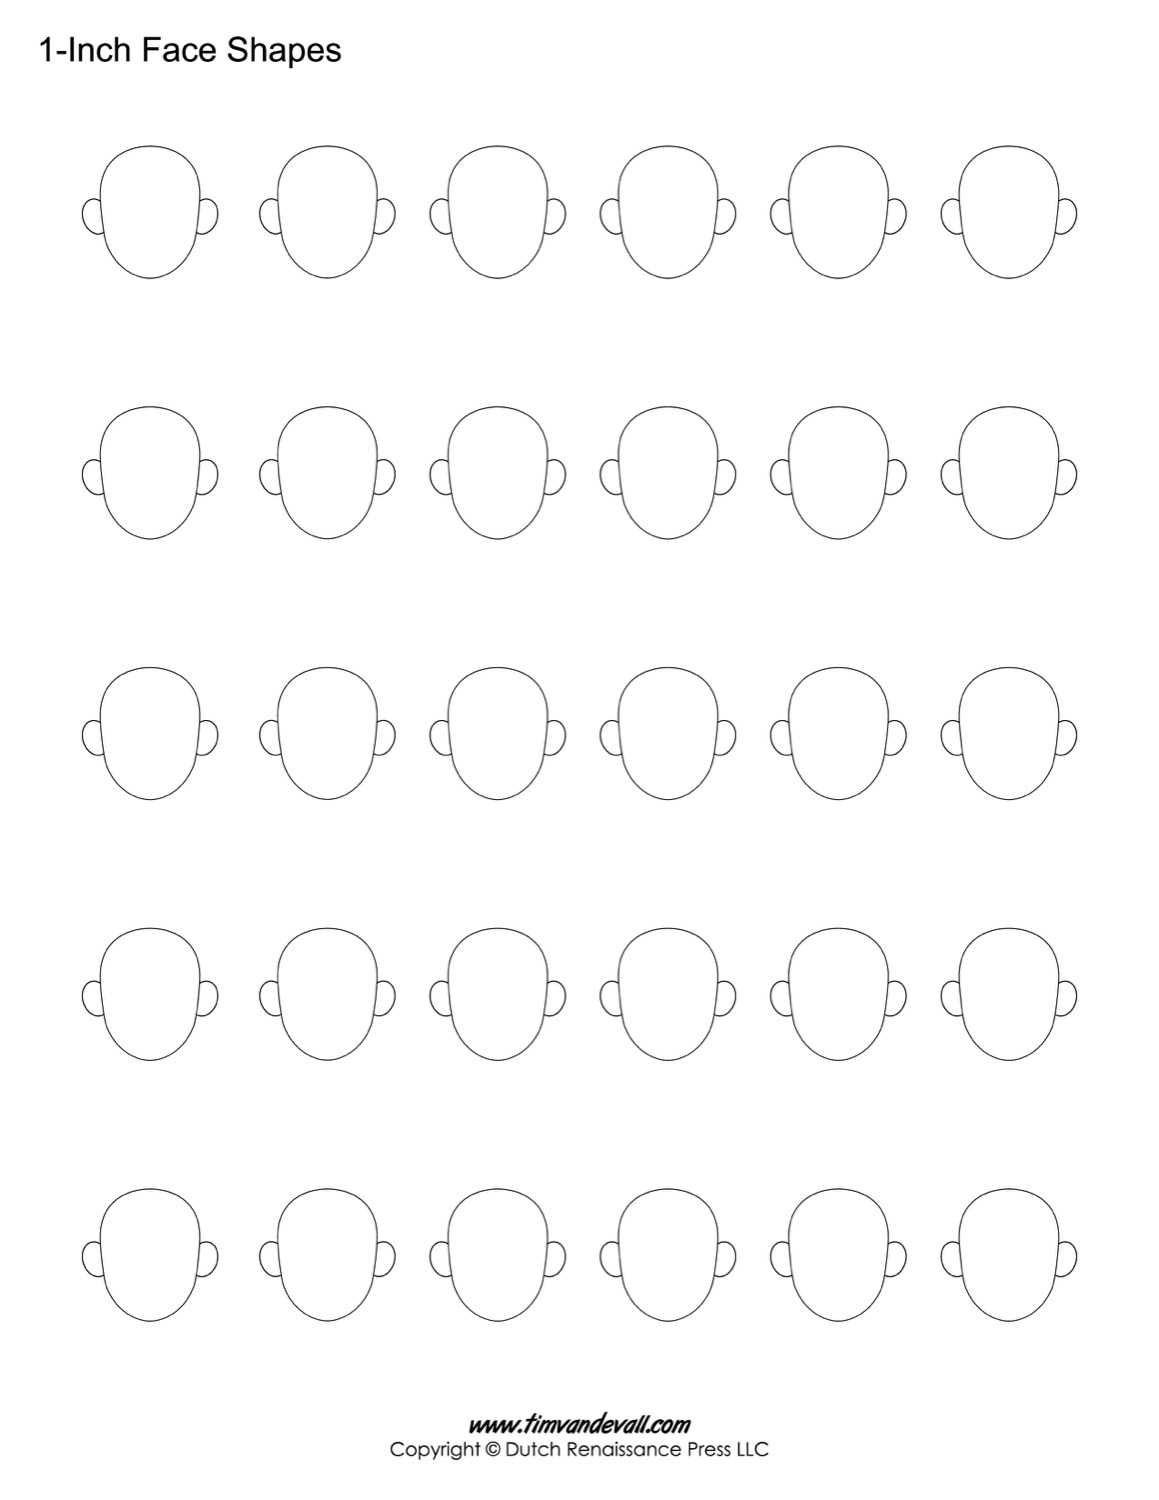 blank-face-templates-printable-face-shapes-for-kids-with-blank-face